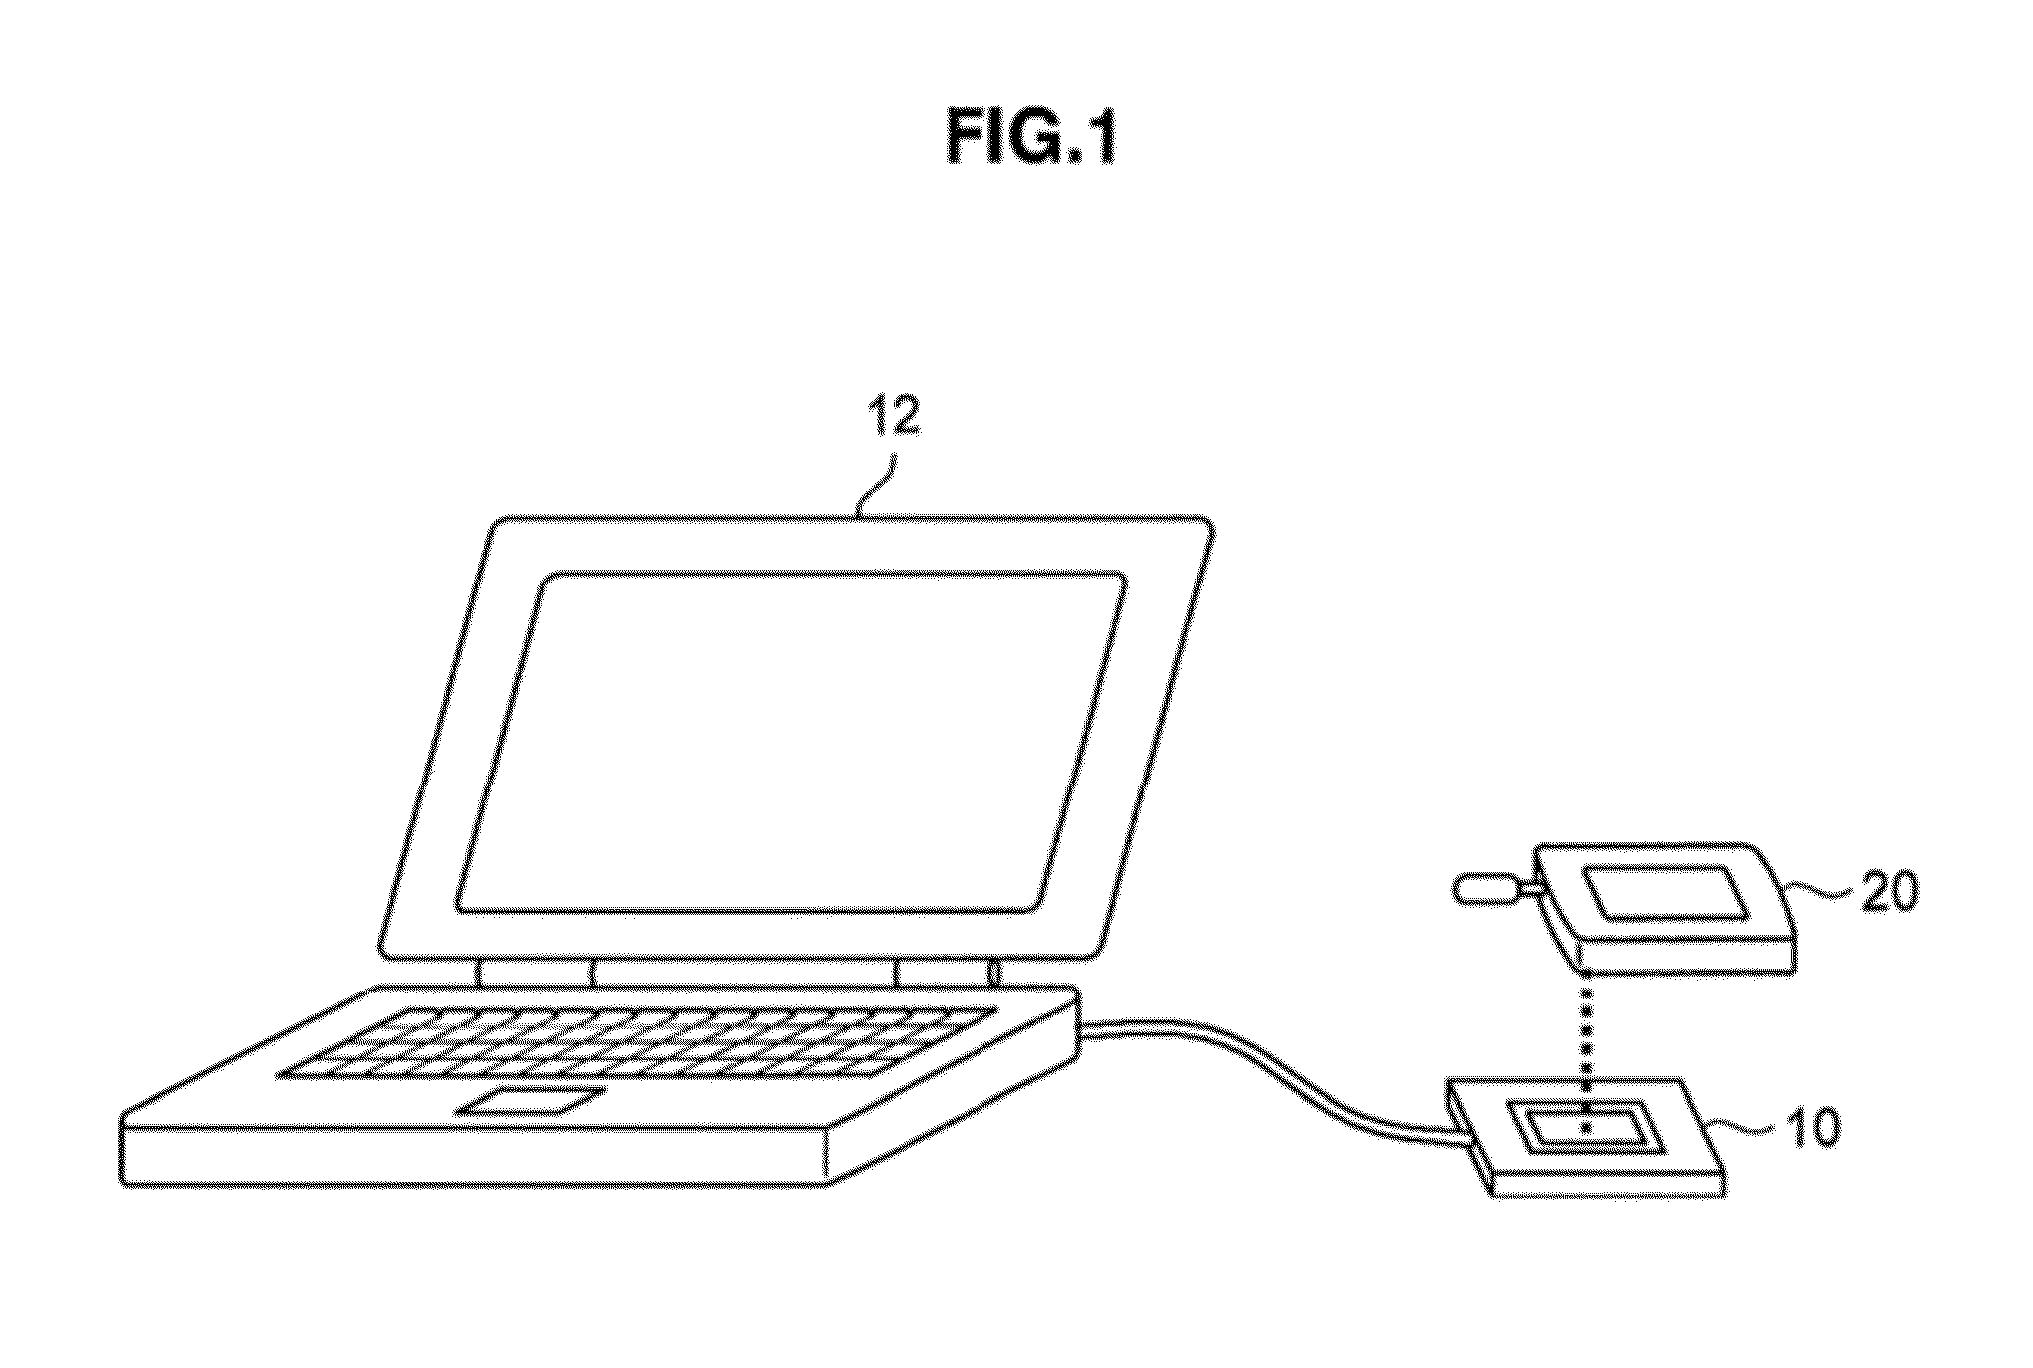 Near field communication apparatus for automated assigning of various functions